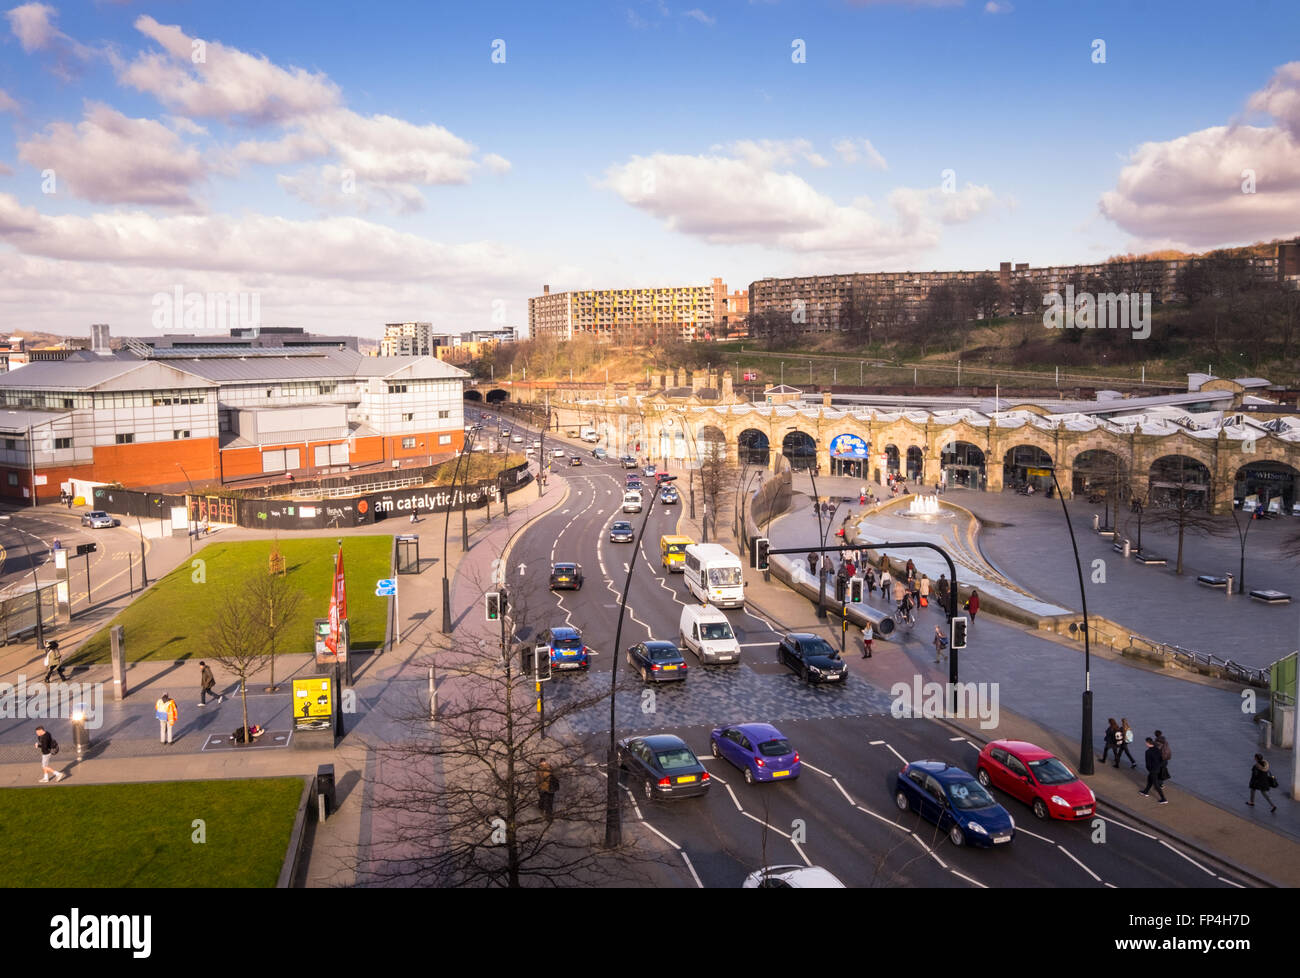 Sheffield Station and Sheaf Square, winter Stock Photo